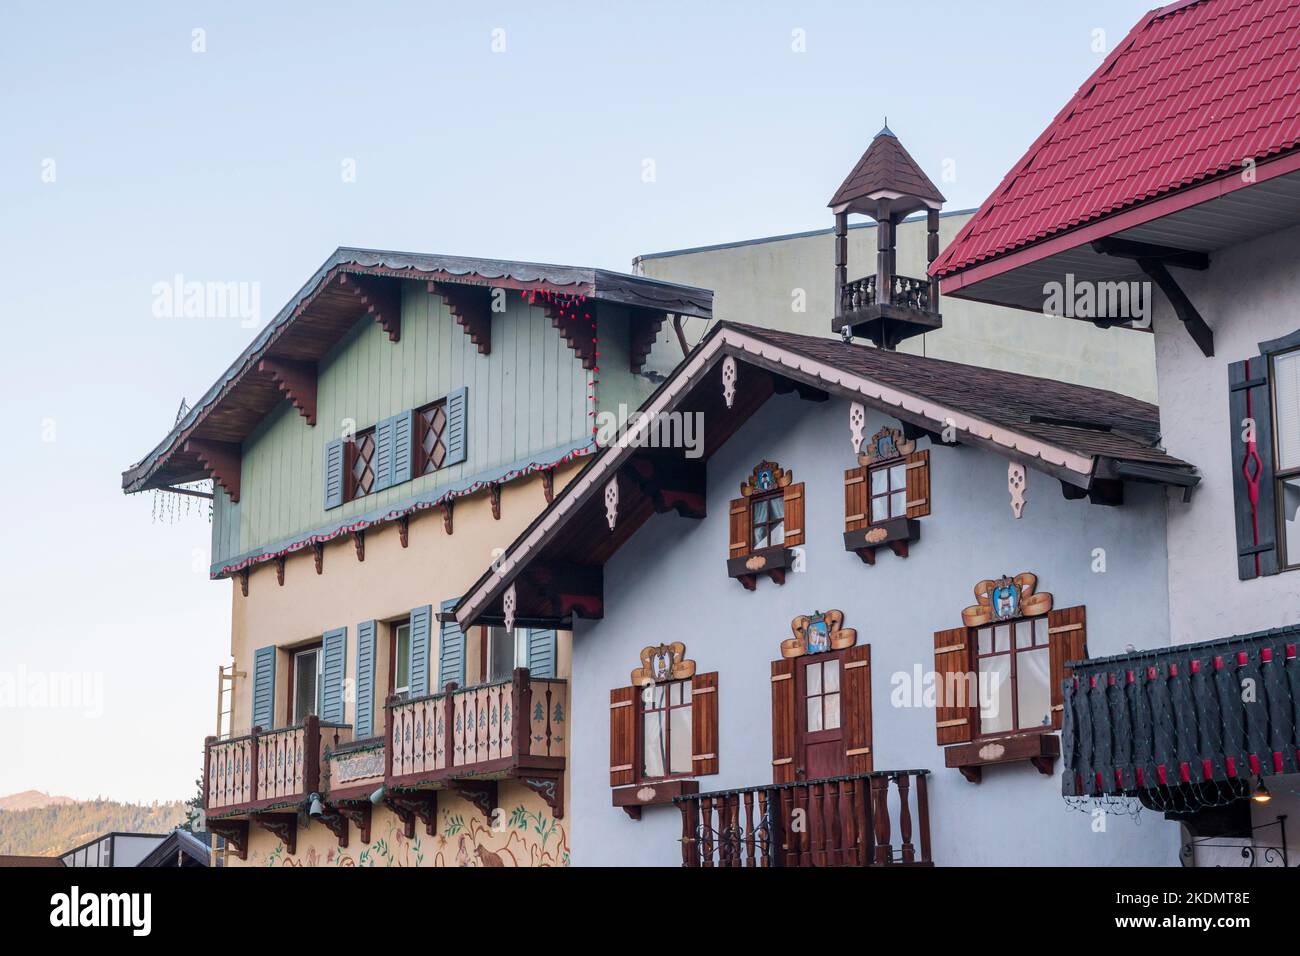 Bavarian style buildings painted pastel blue and green in the German-themed town of Leavenworth, Washington, USA. Stock Photo